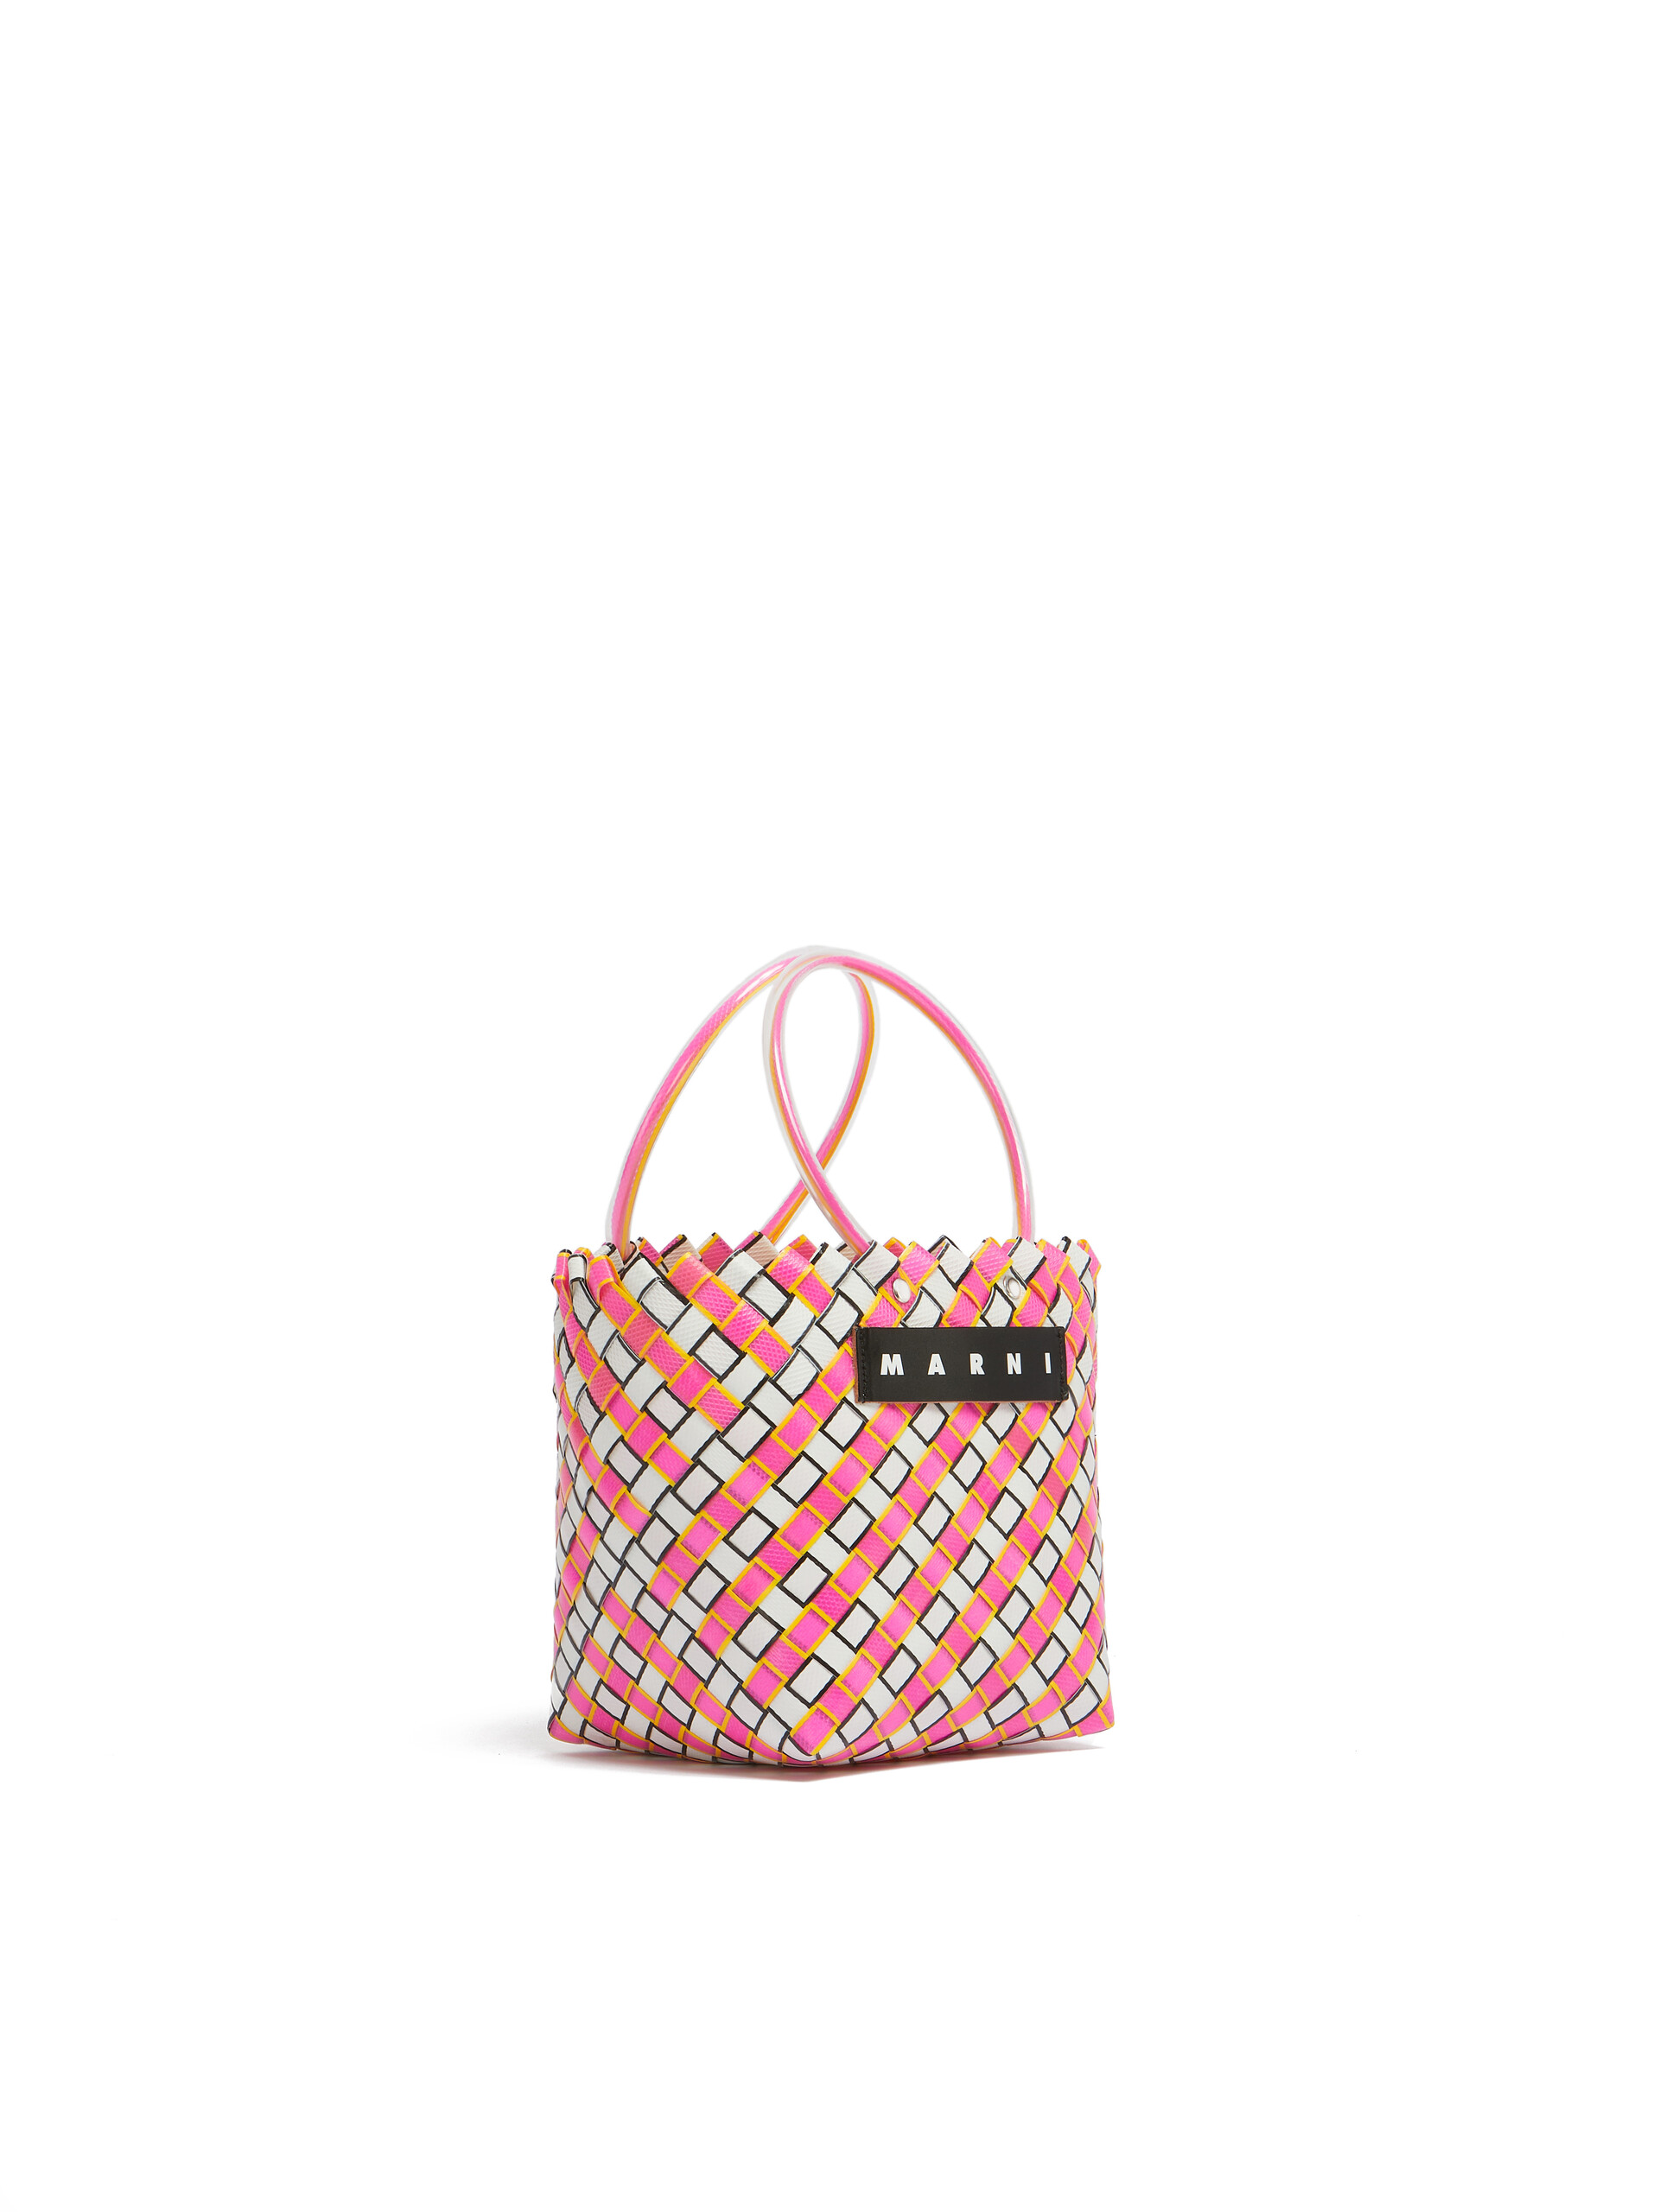 MARNI MARKET TAHA bag in green and burgundy woven material - Shopping Bags - Image 2